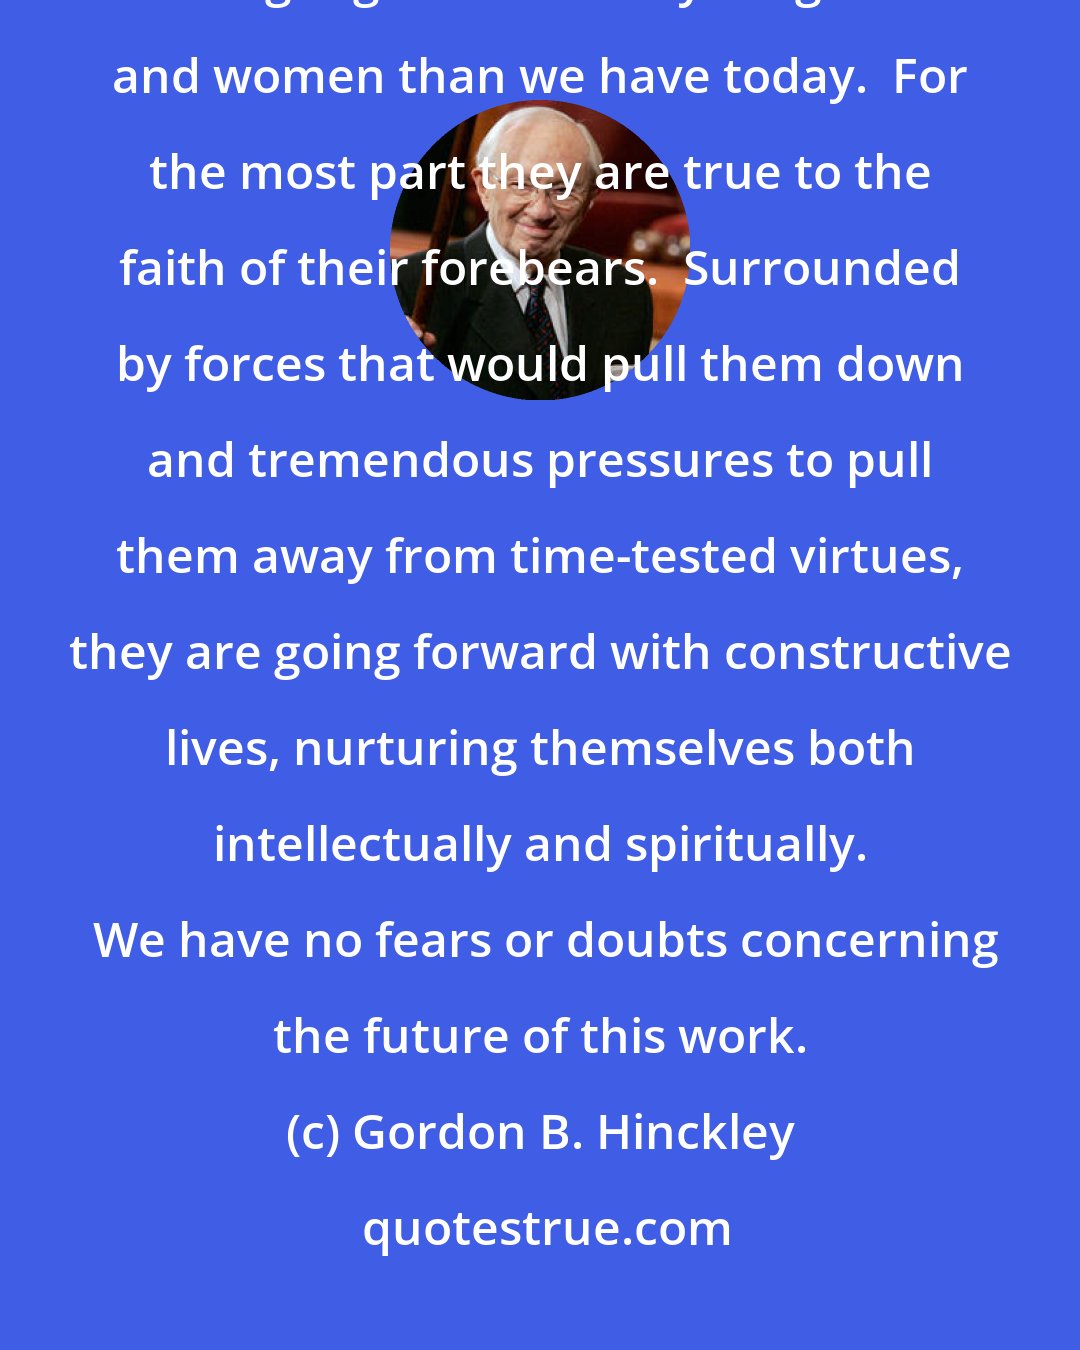 Gordon B. Hinckley: We are particularly proud of our youth.  I think we have never had a stronger generation of young men and women than we have today.  For the most part they are true to the faith of their forebears.  Surrounded by forces that would pull them down and tremendous pressures to pull them away from time-tested virtues, they are going forward with constructive lives, nurturing themselves both intellectually and spiritually.  We have no fears or doubts concerning the future of this work.